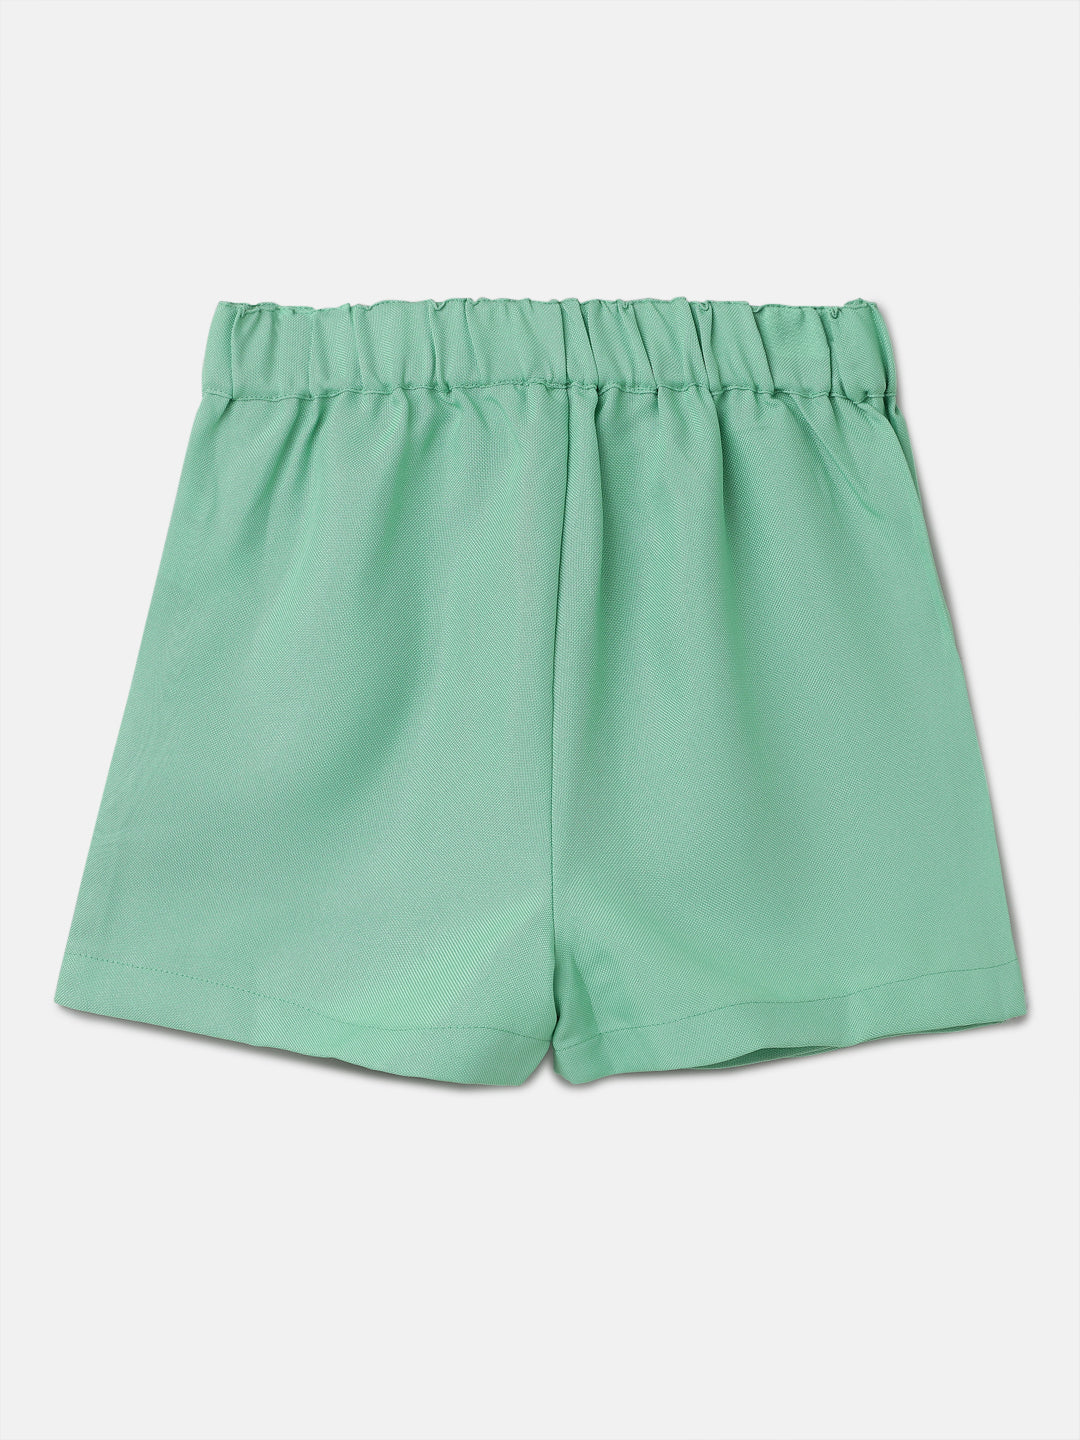 Girls Self Textured Solid Green Shorts